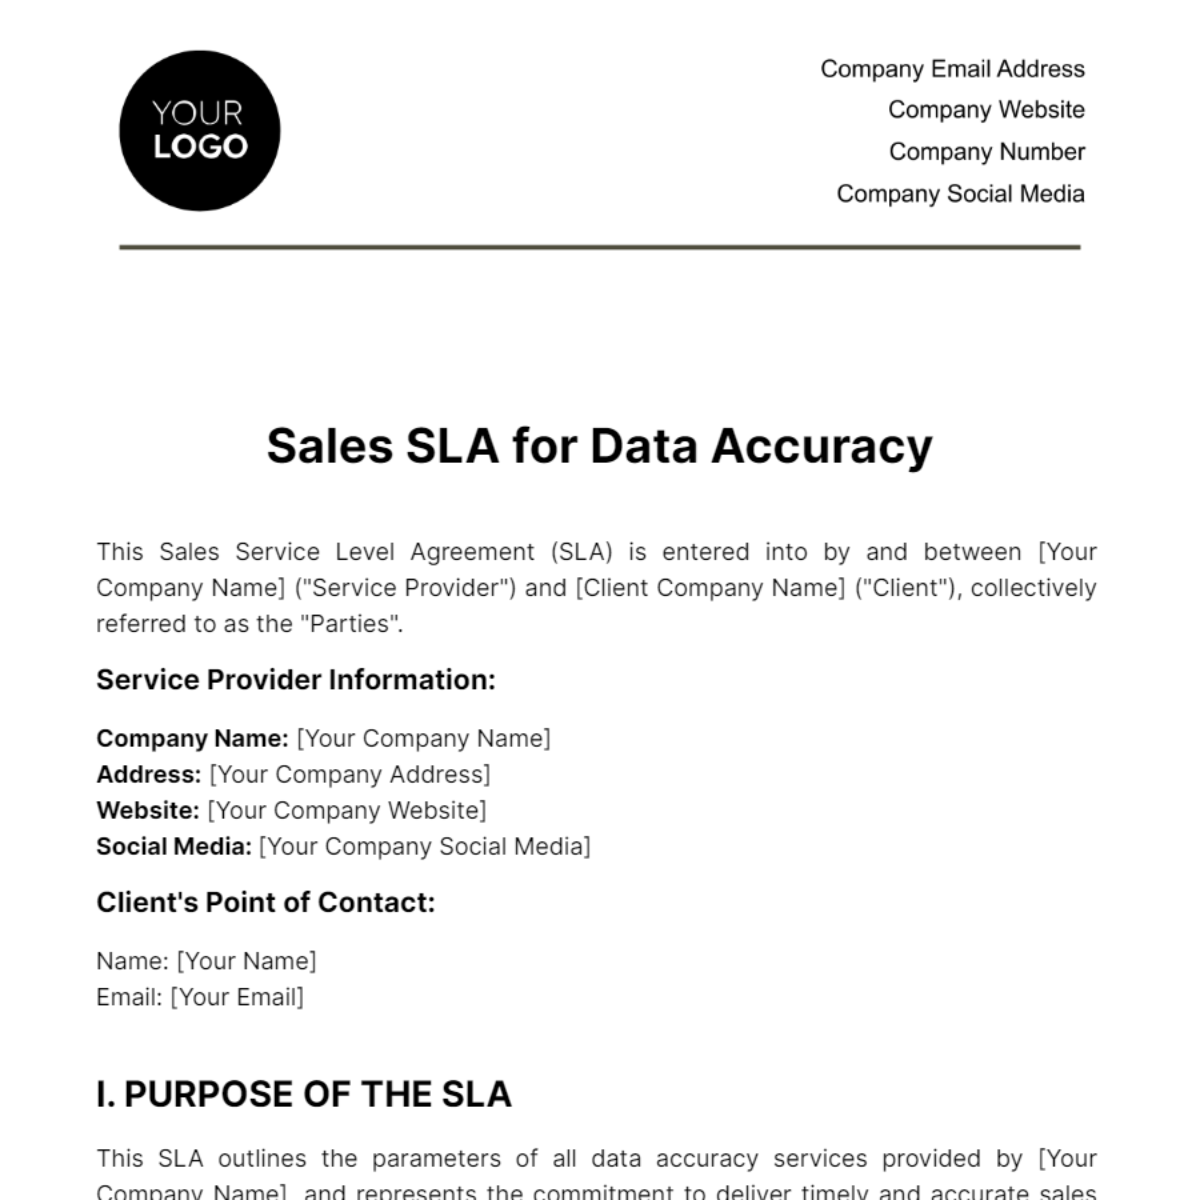 Free Sales SLA for Data Accuracy Template